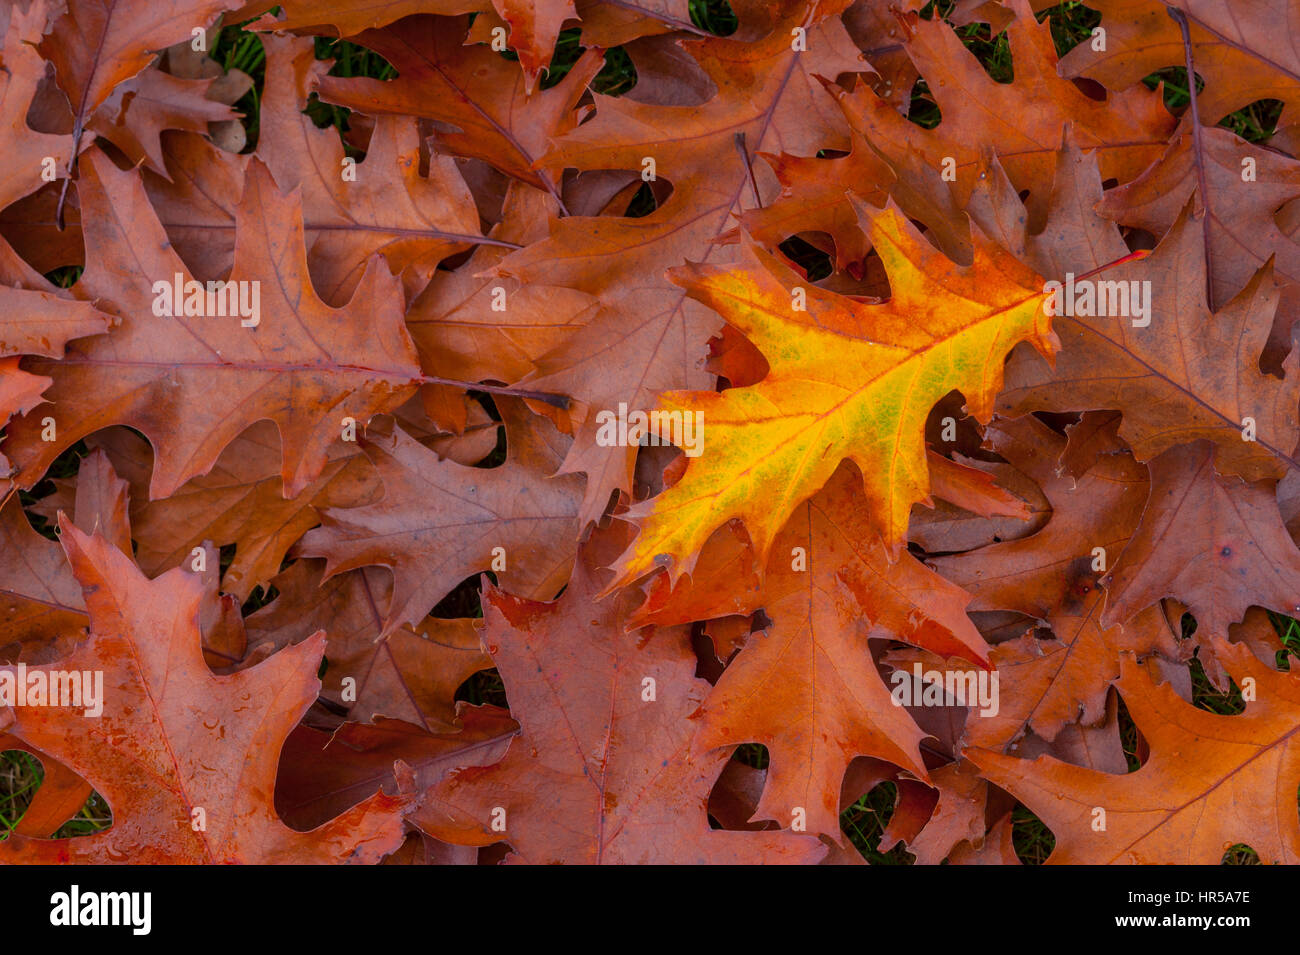 Yellow oak leaf sitting on a bed of brown oak leaves. Stock Photo